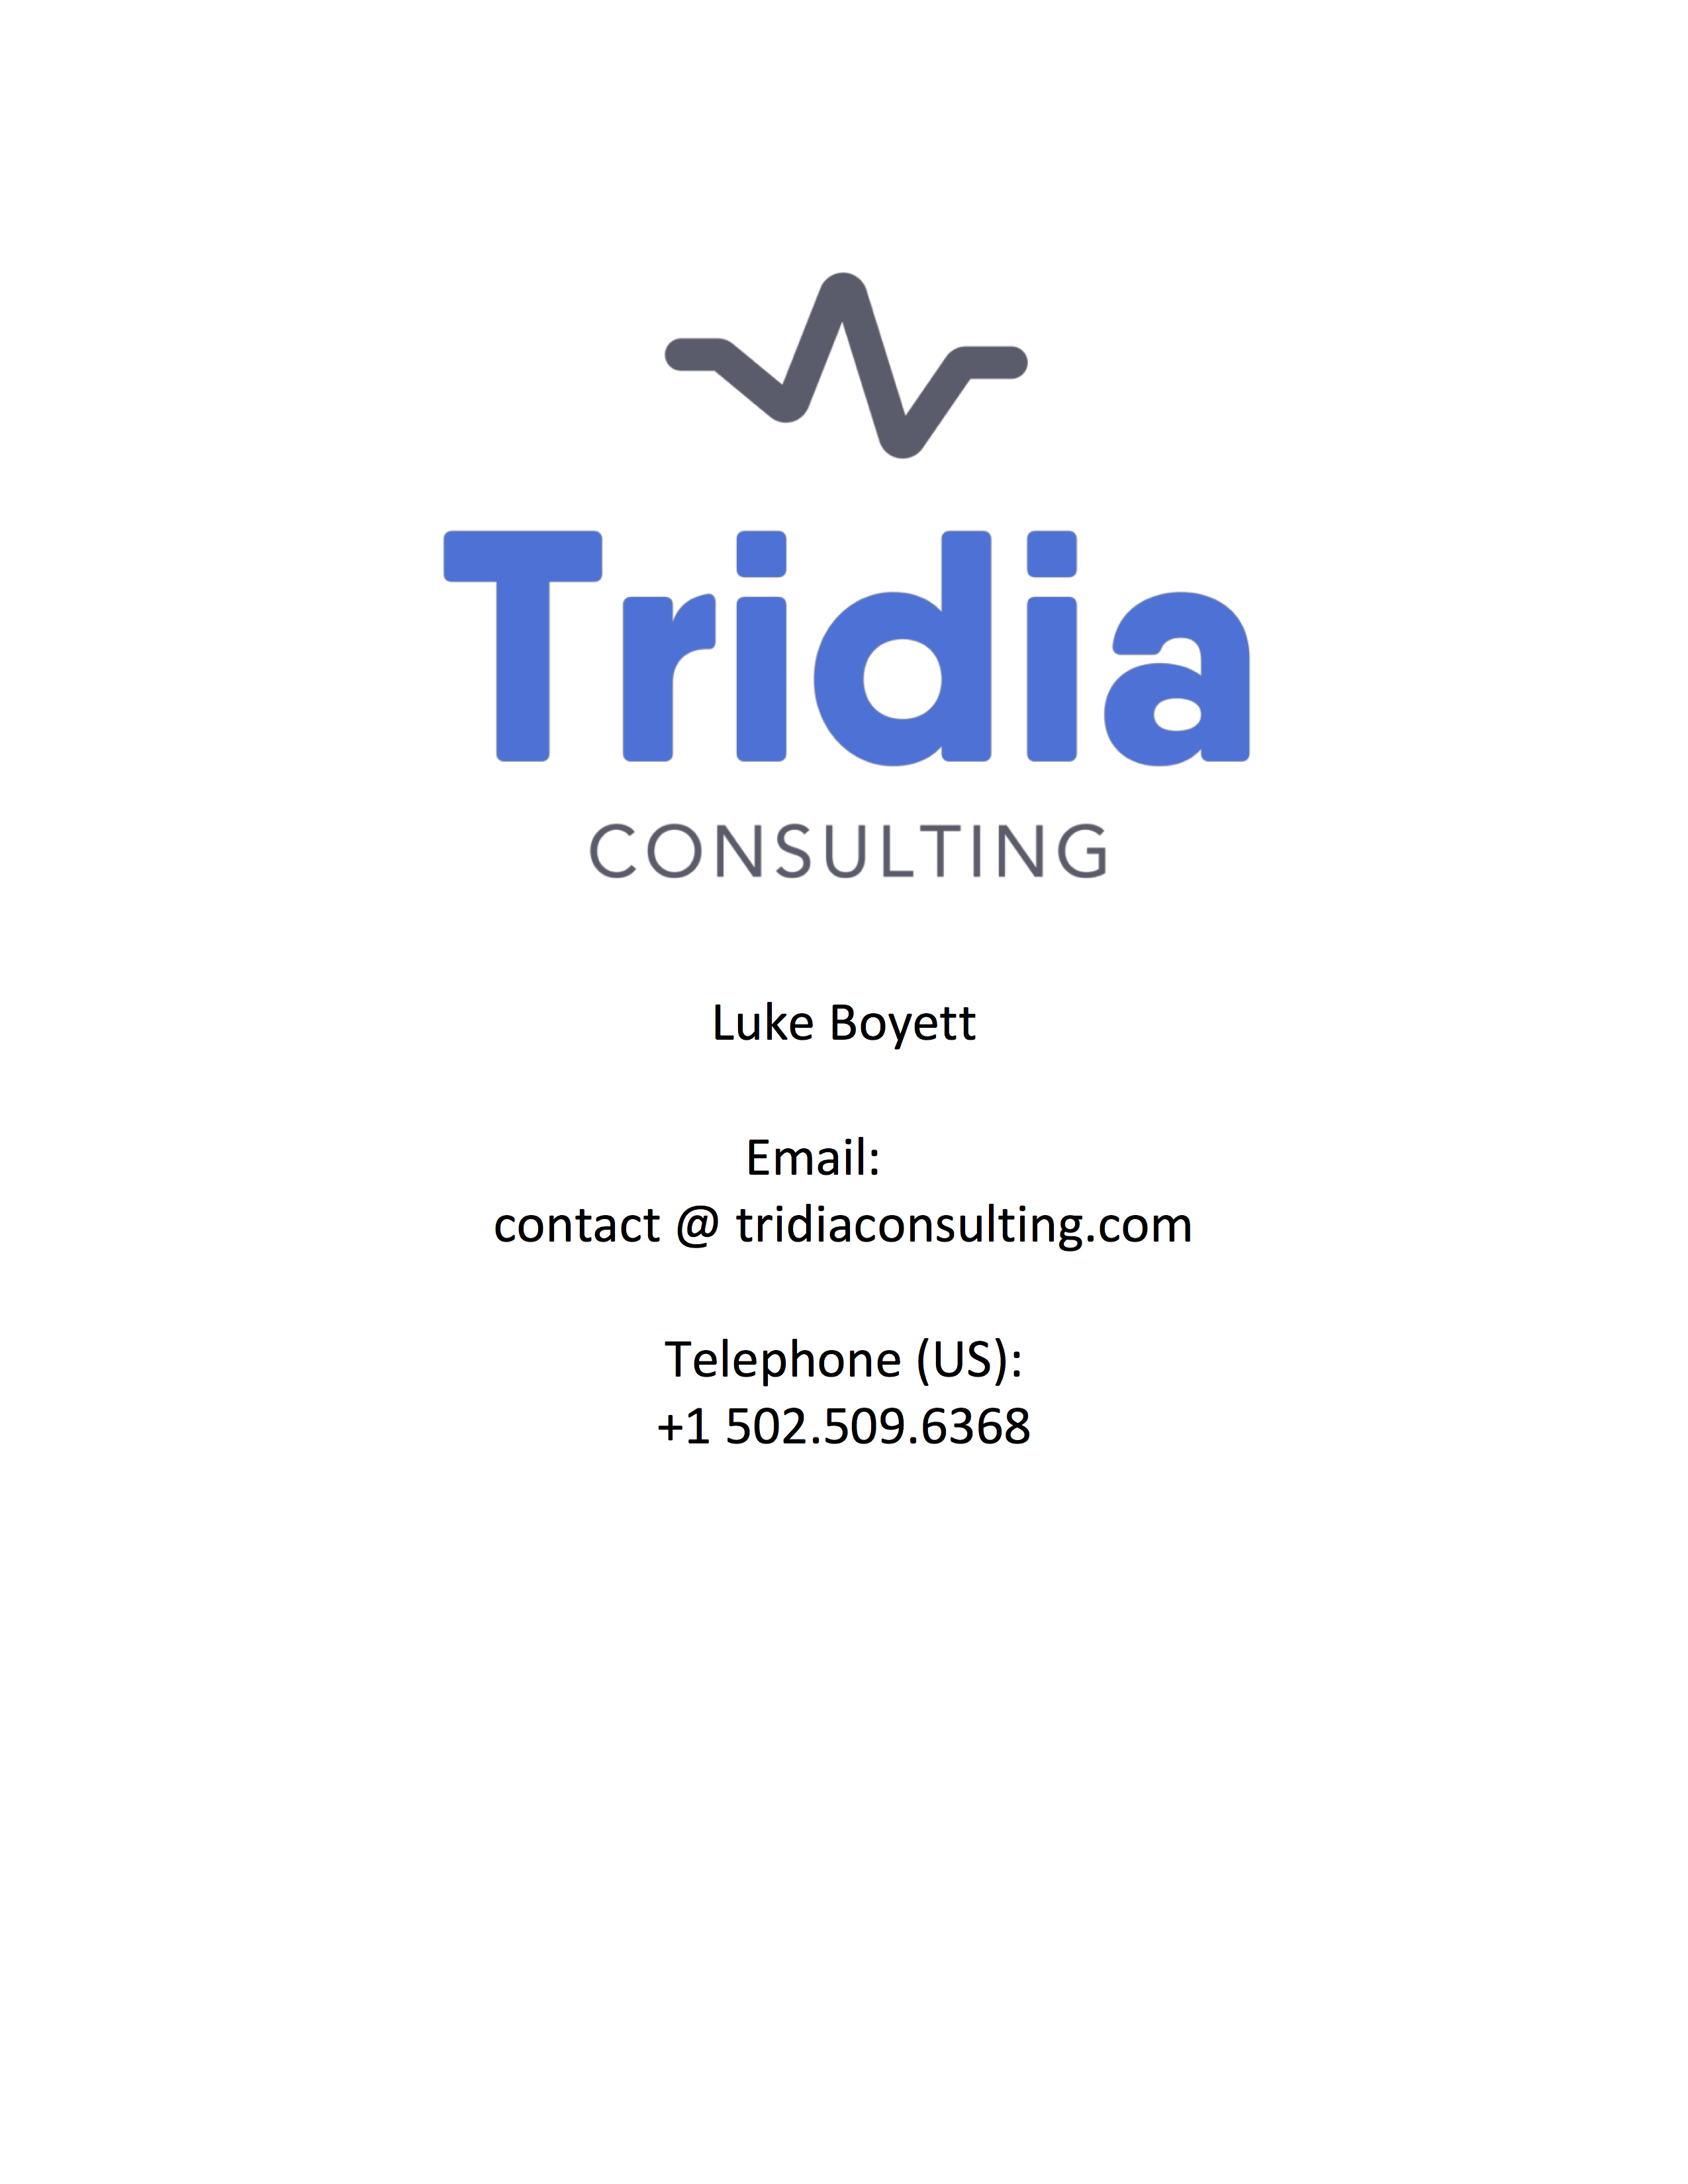 Tridia Consulting contact information